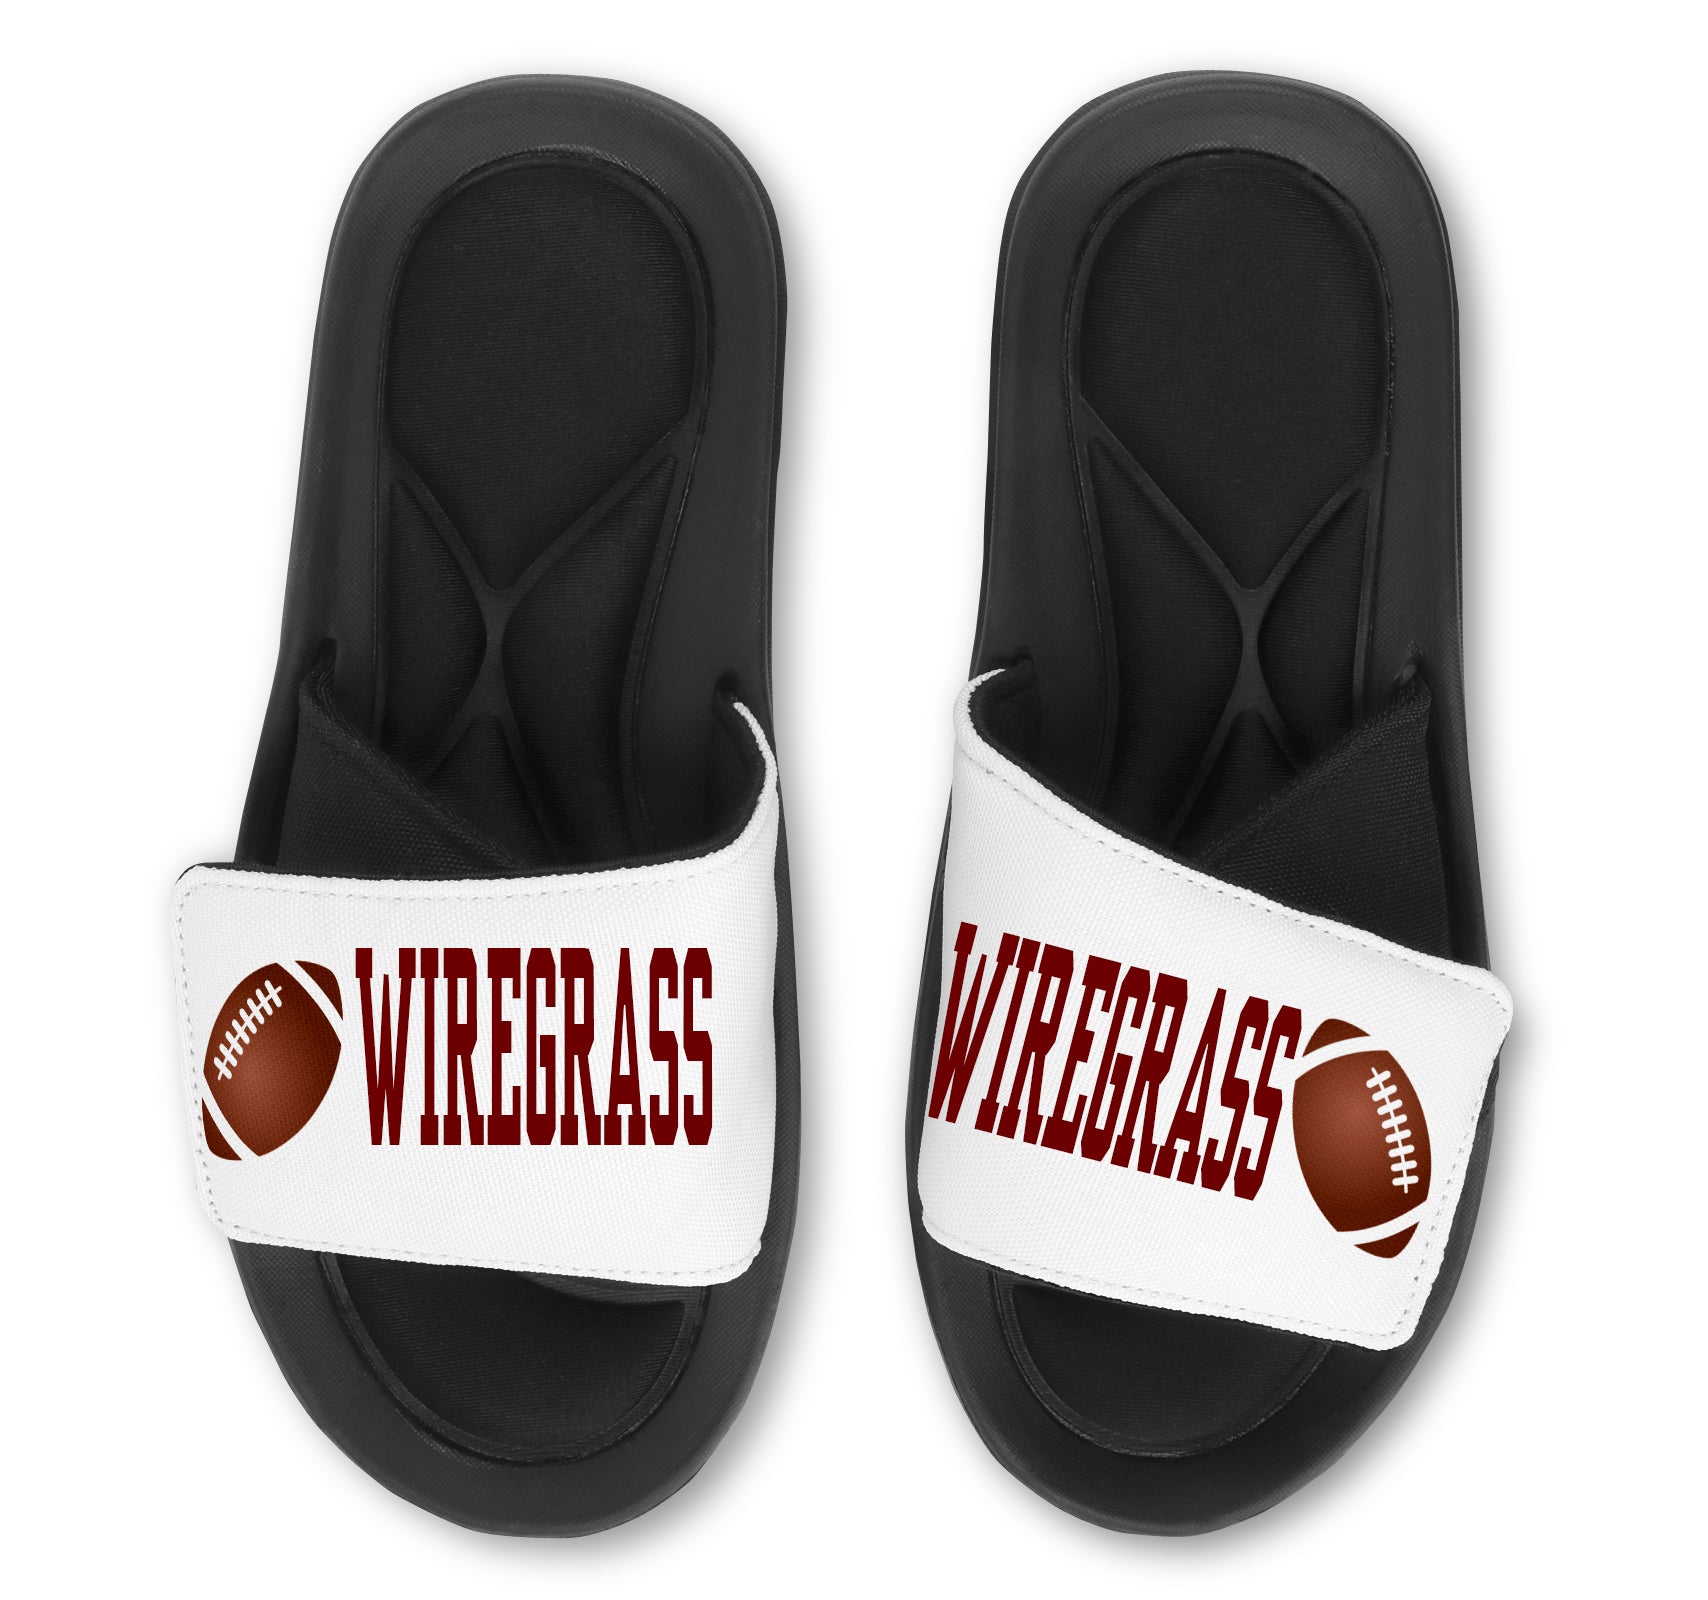 FOOTBALL Slides - Customize with Your Name and/or Number